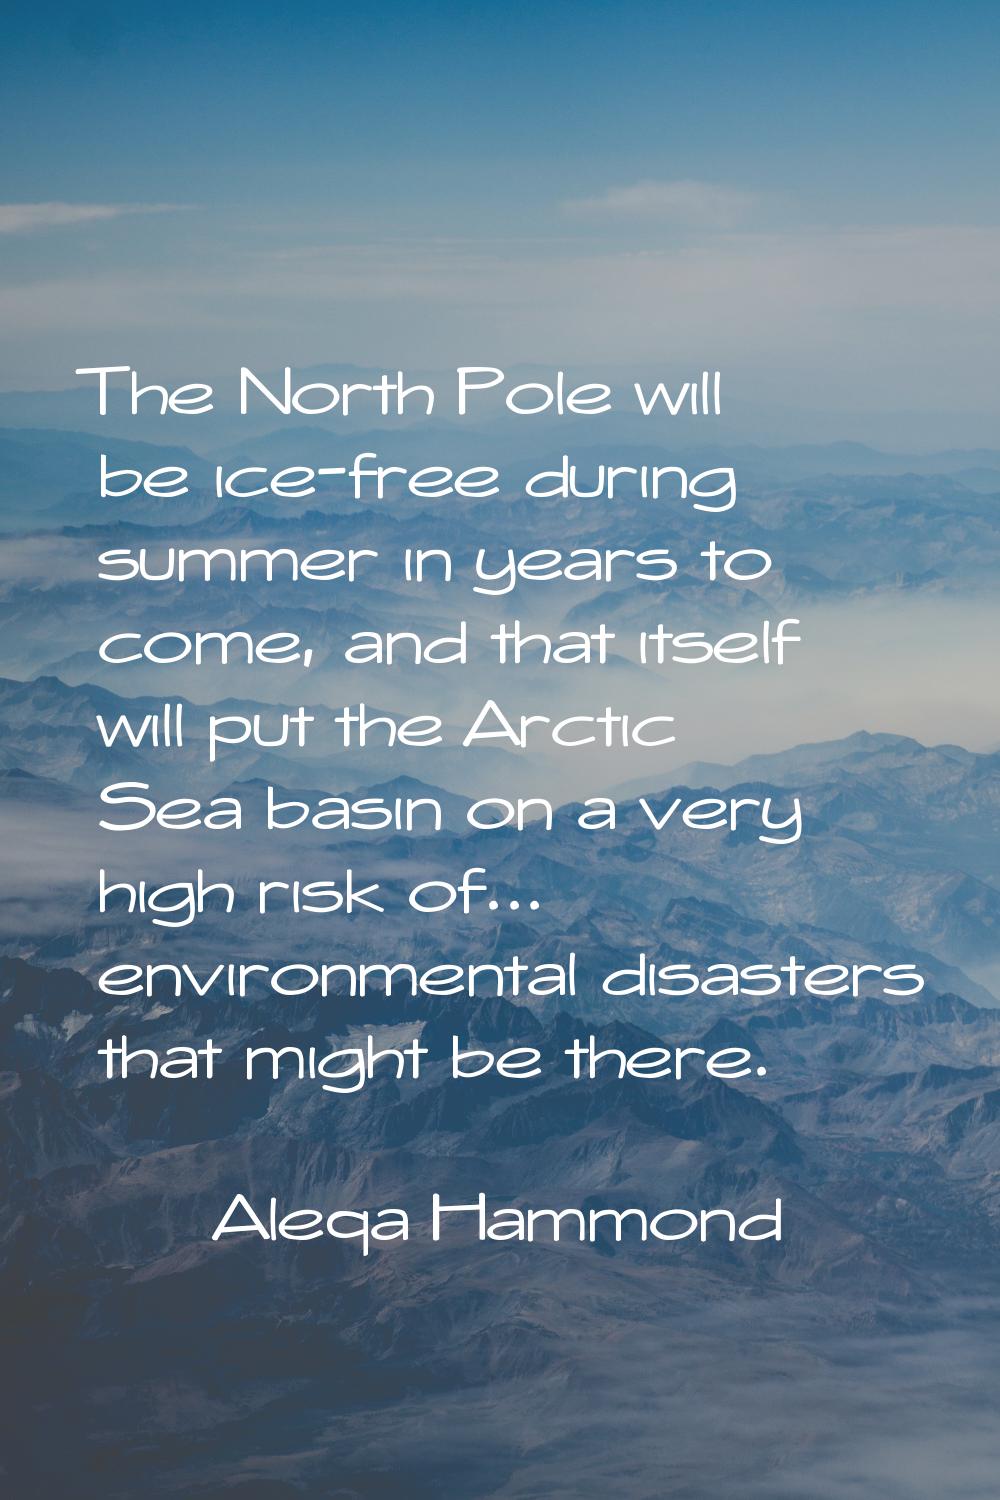 The North Pole will be ice-free during summer in years to come, and that itself will put the Arctic